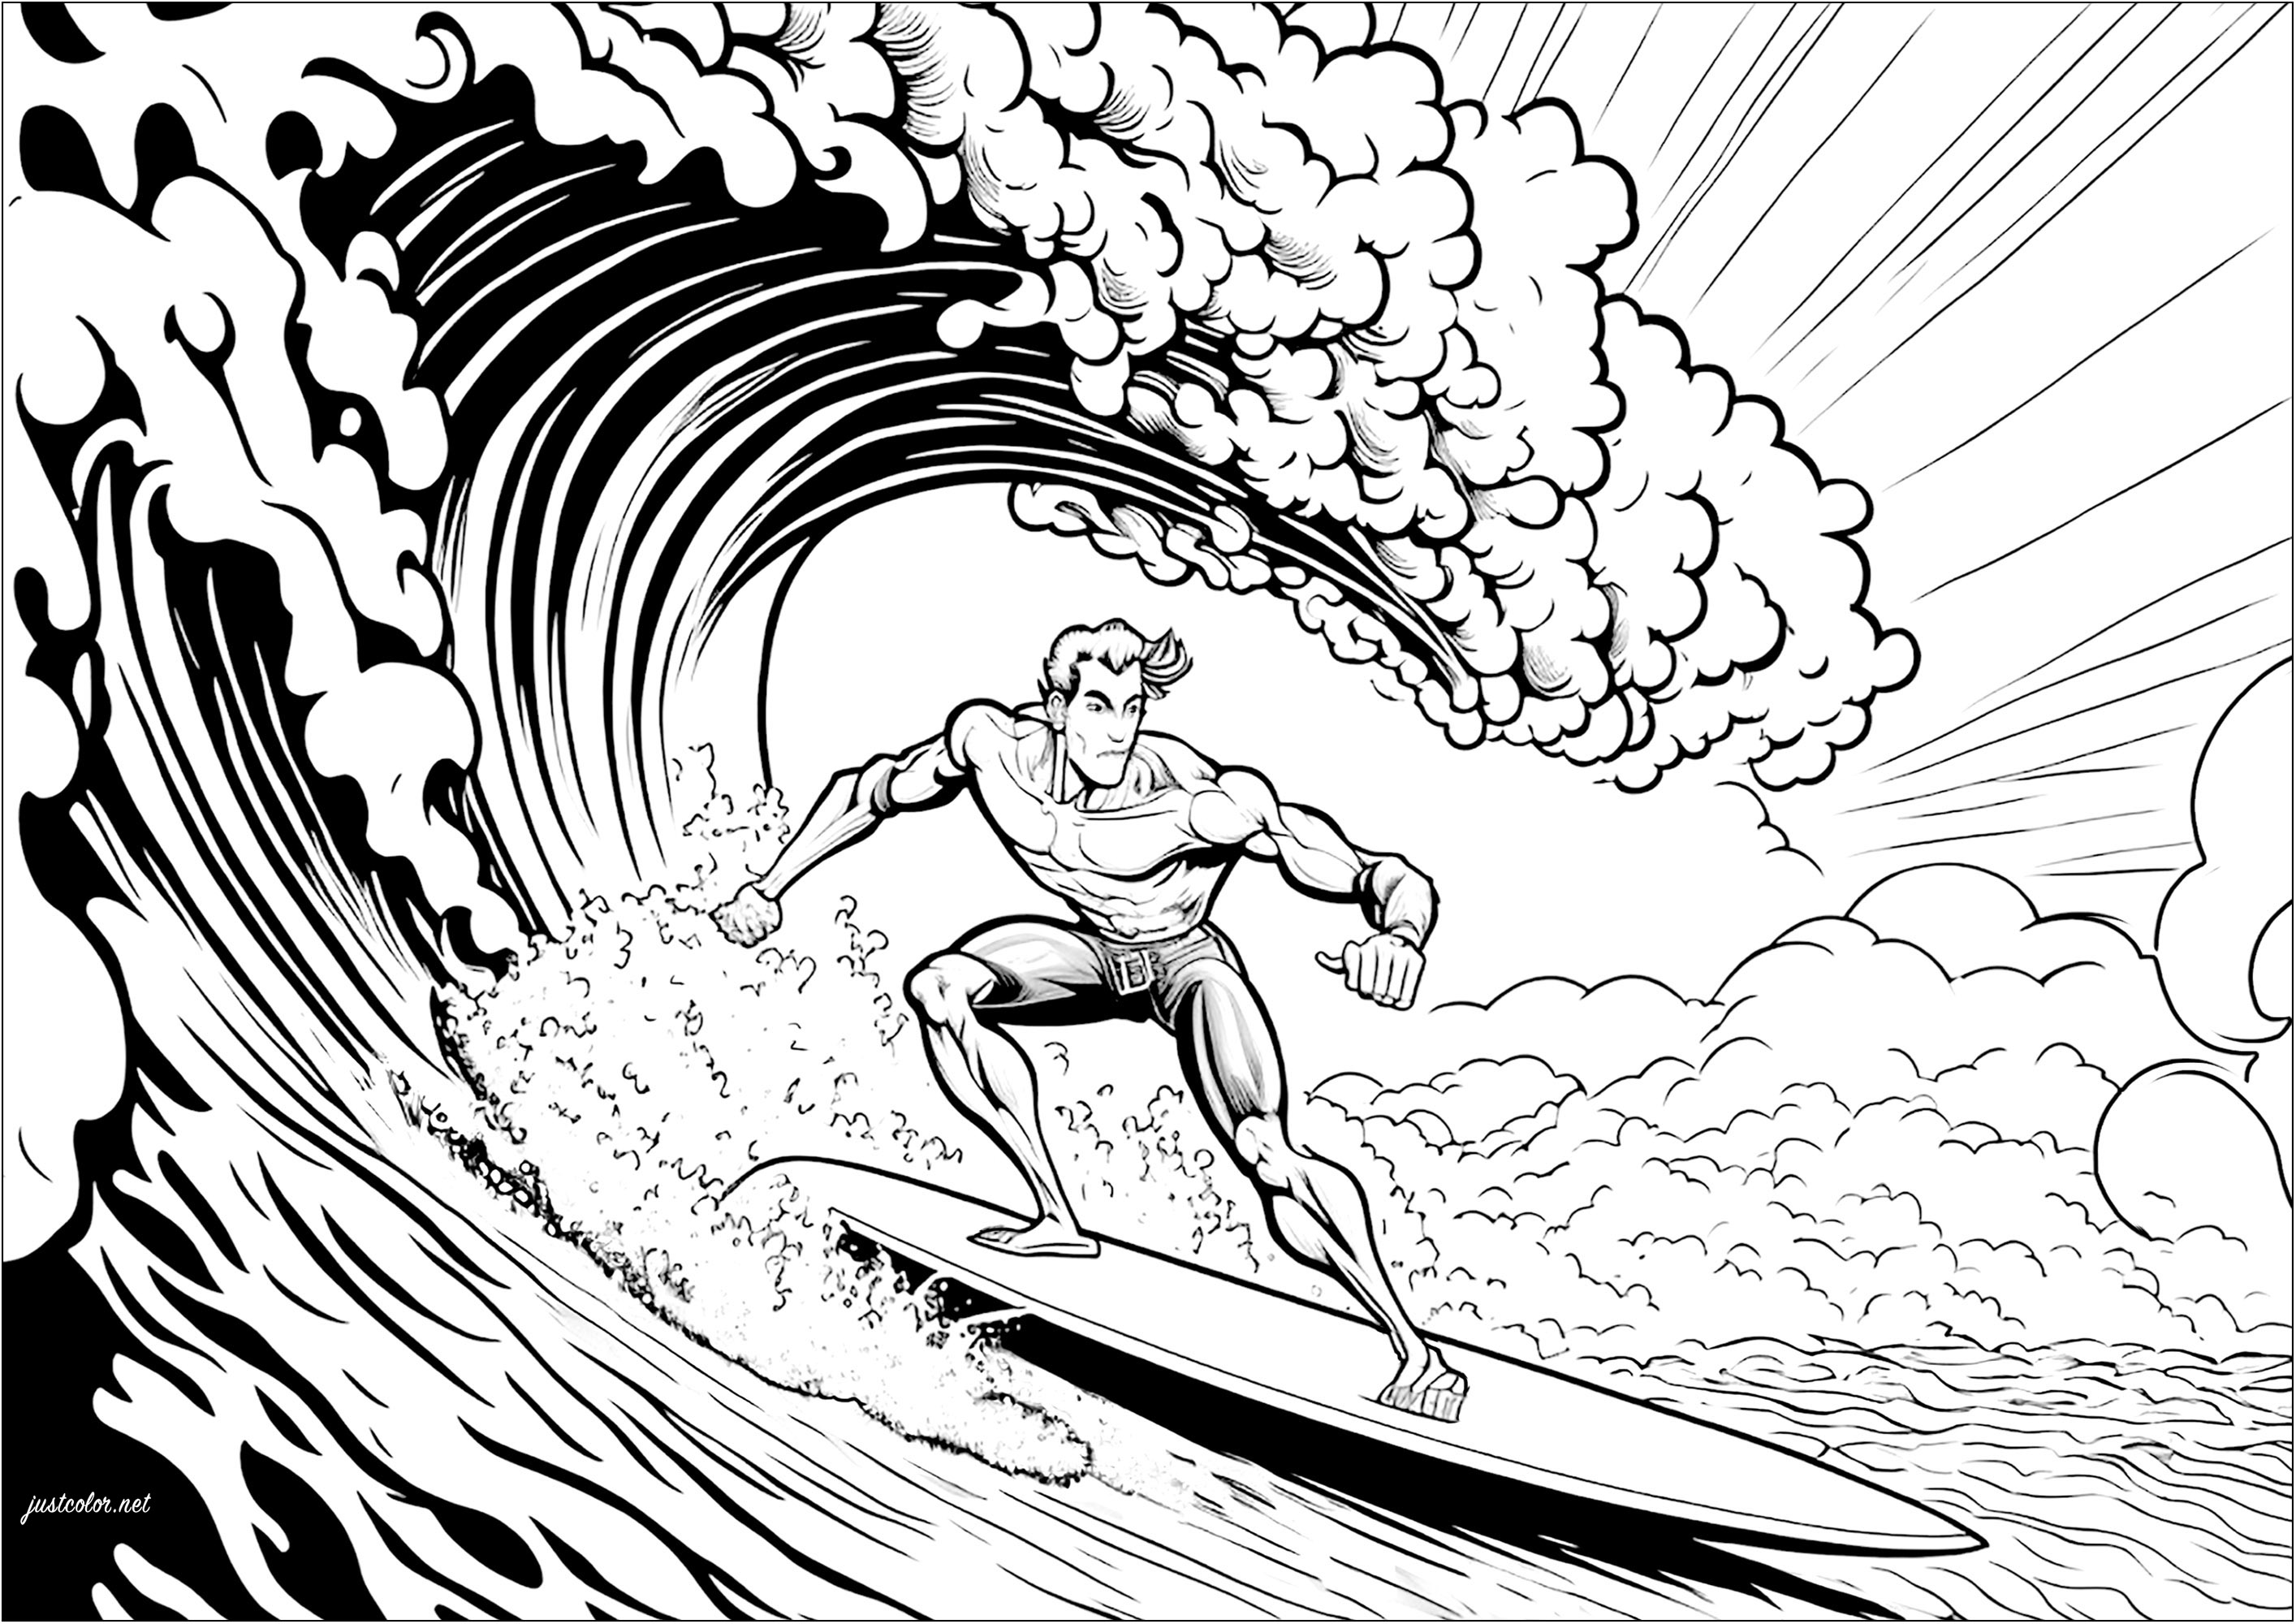 Ride the waves with this fun surfer coloring page !.  With this surfer facing a scary wave, this coloring page is perfect for those who love the sea, the ocean and all water sports.